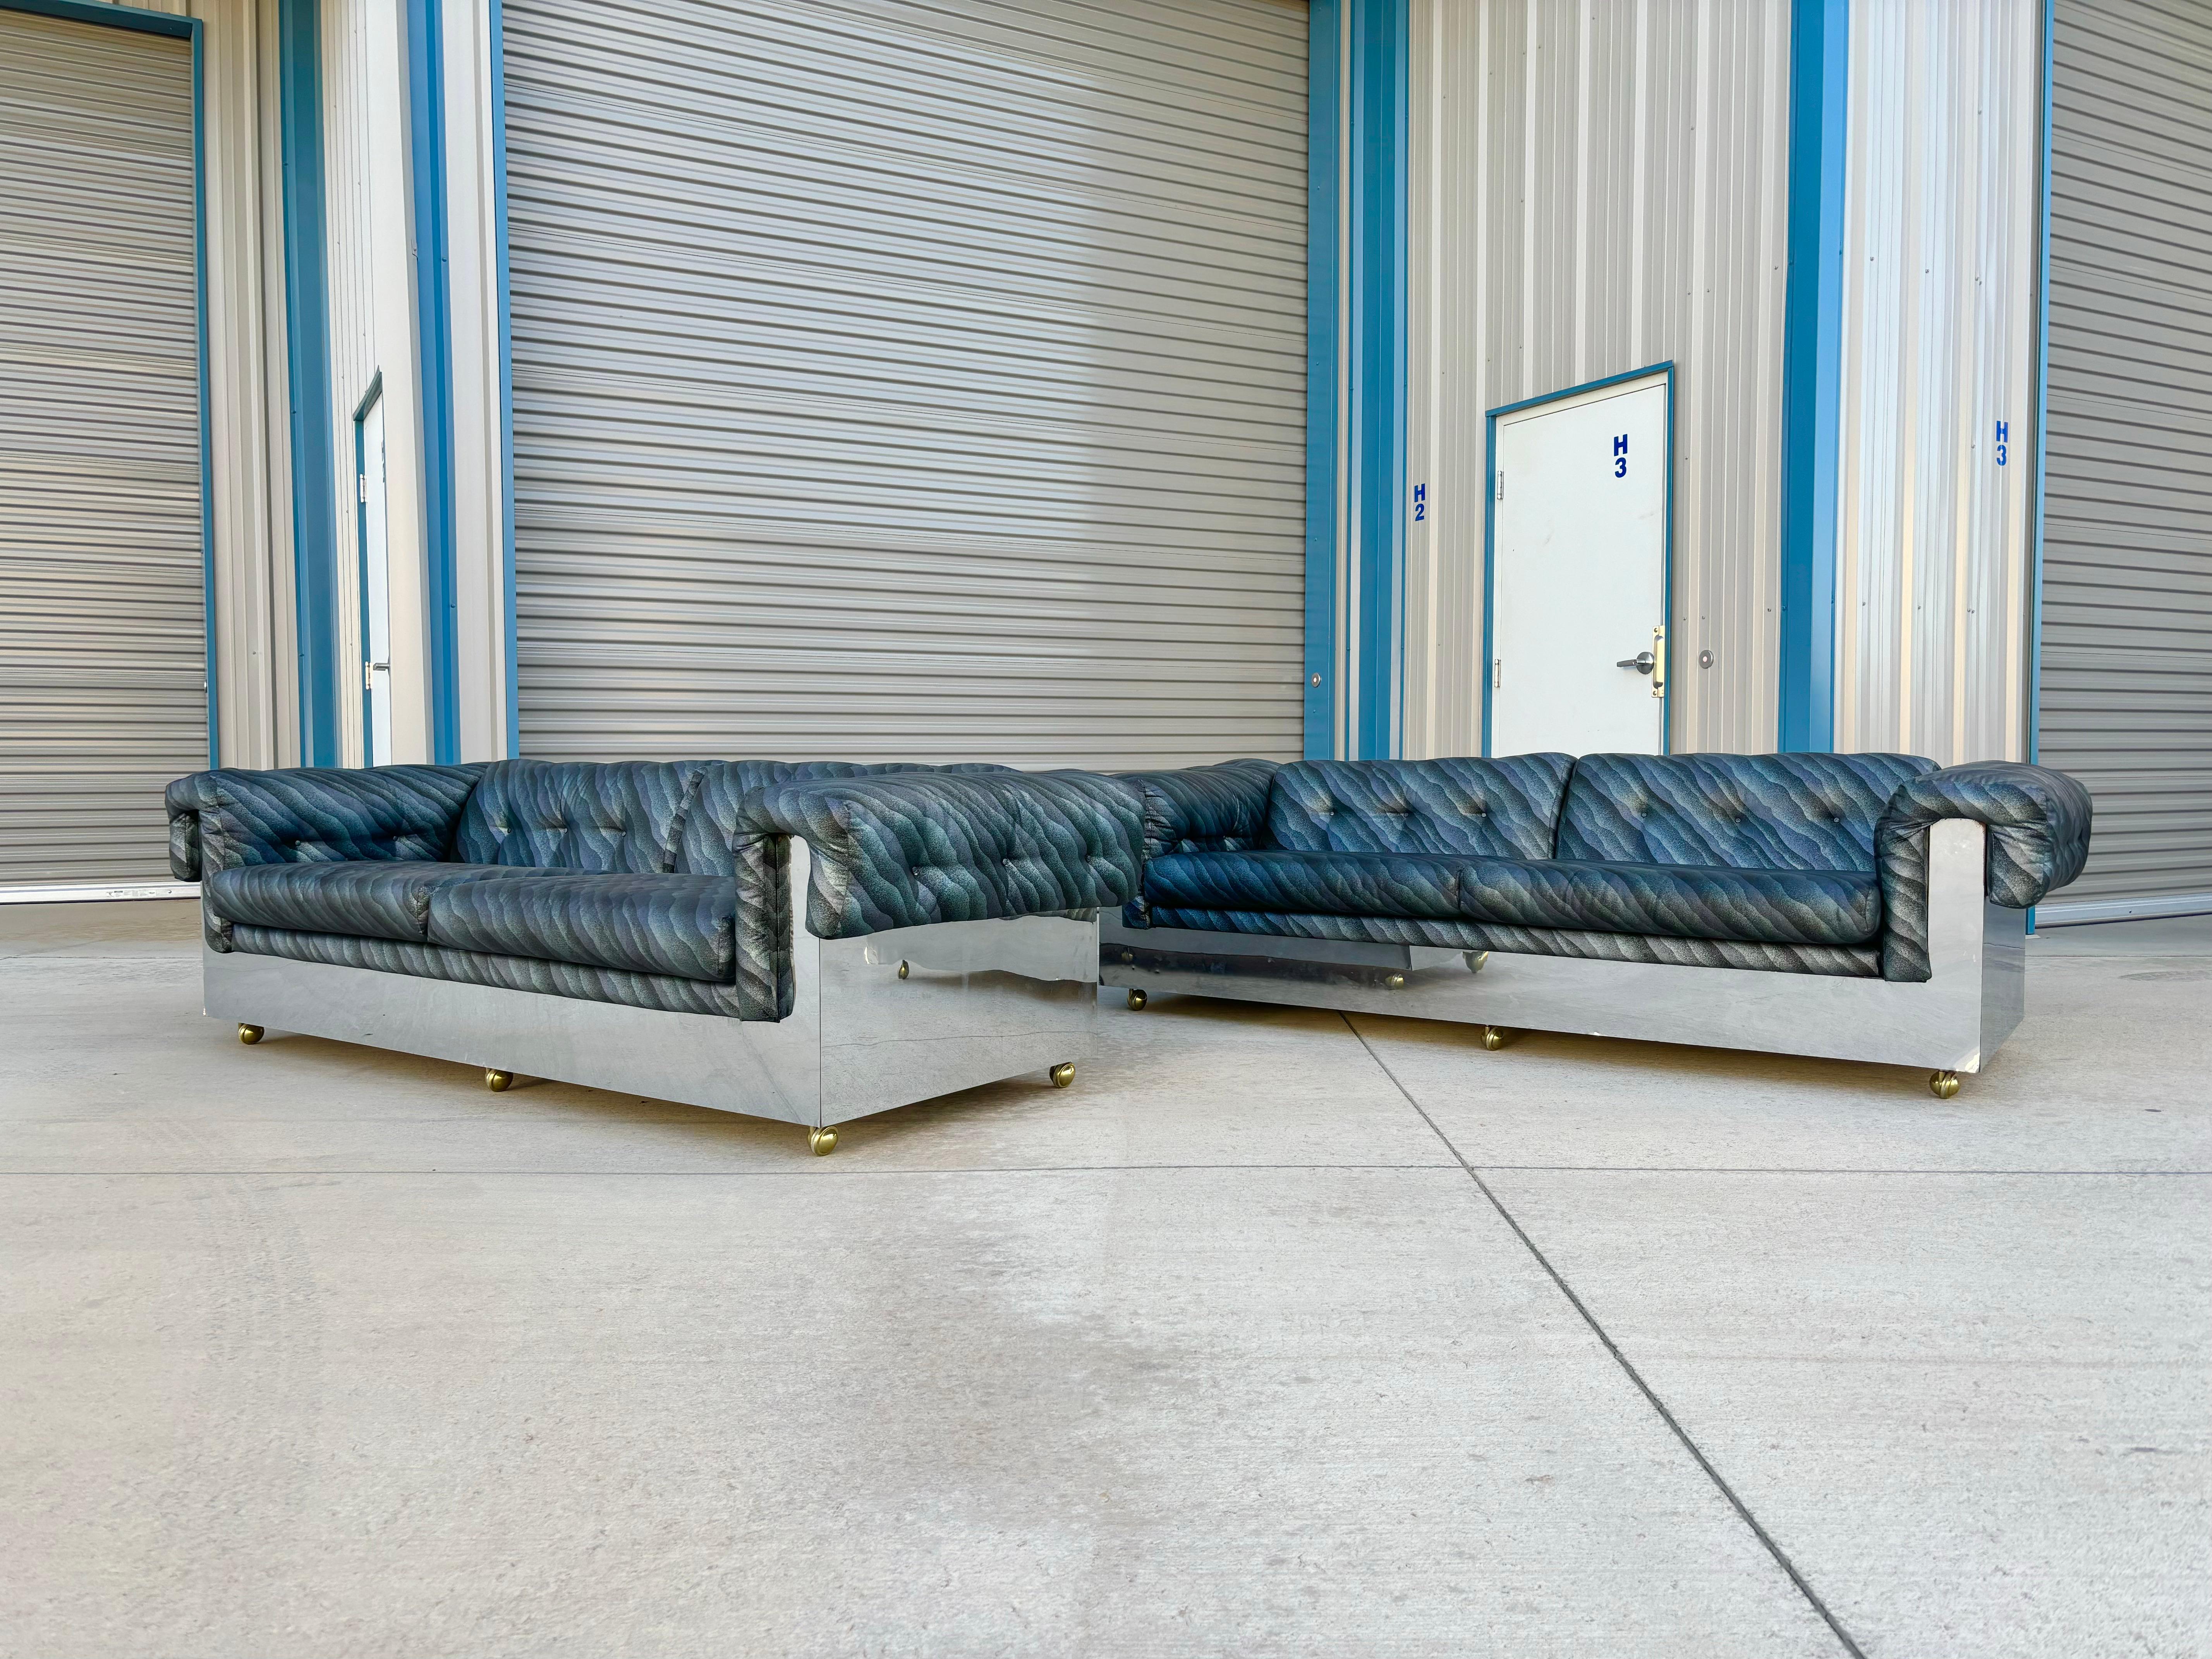 Pair of mid-century chrome sofas designed by Milo Baughman in the United States circa 1970s. These sofas are both stylish and functional, featuring a sleek chrome wrap-around design that adds a touch of modern elegance to any space. The sofa also